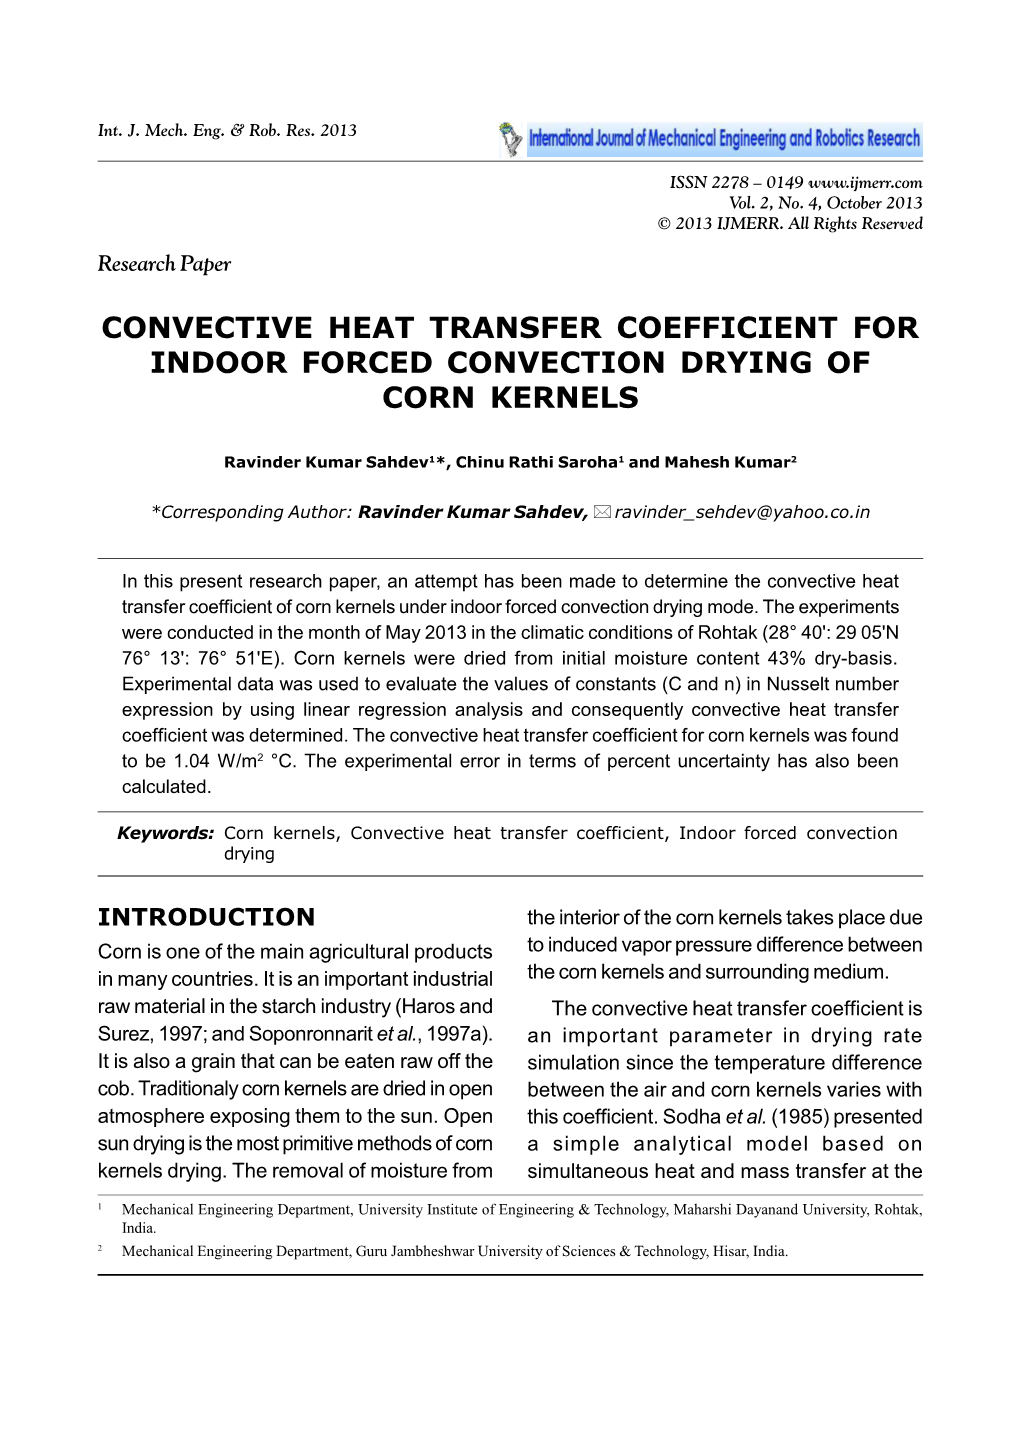 Convective Heat Transfer Coefficient for Indoor Forced Convection Drying of Corn Kernels